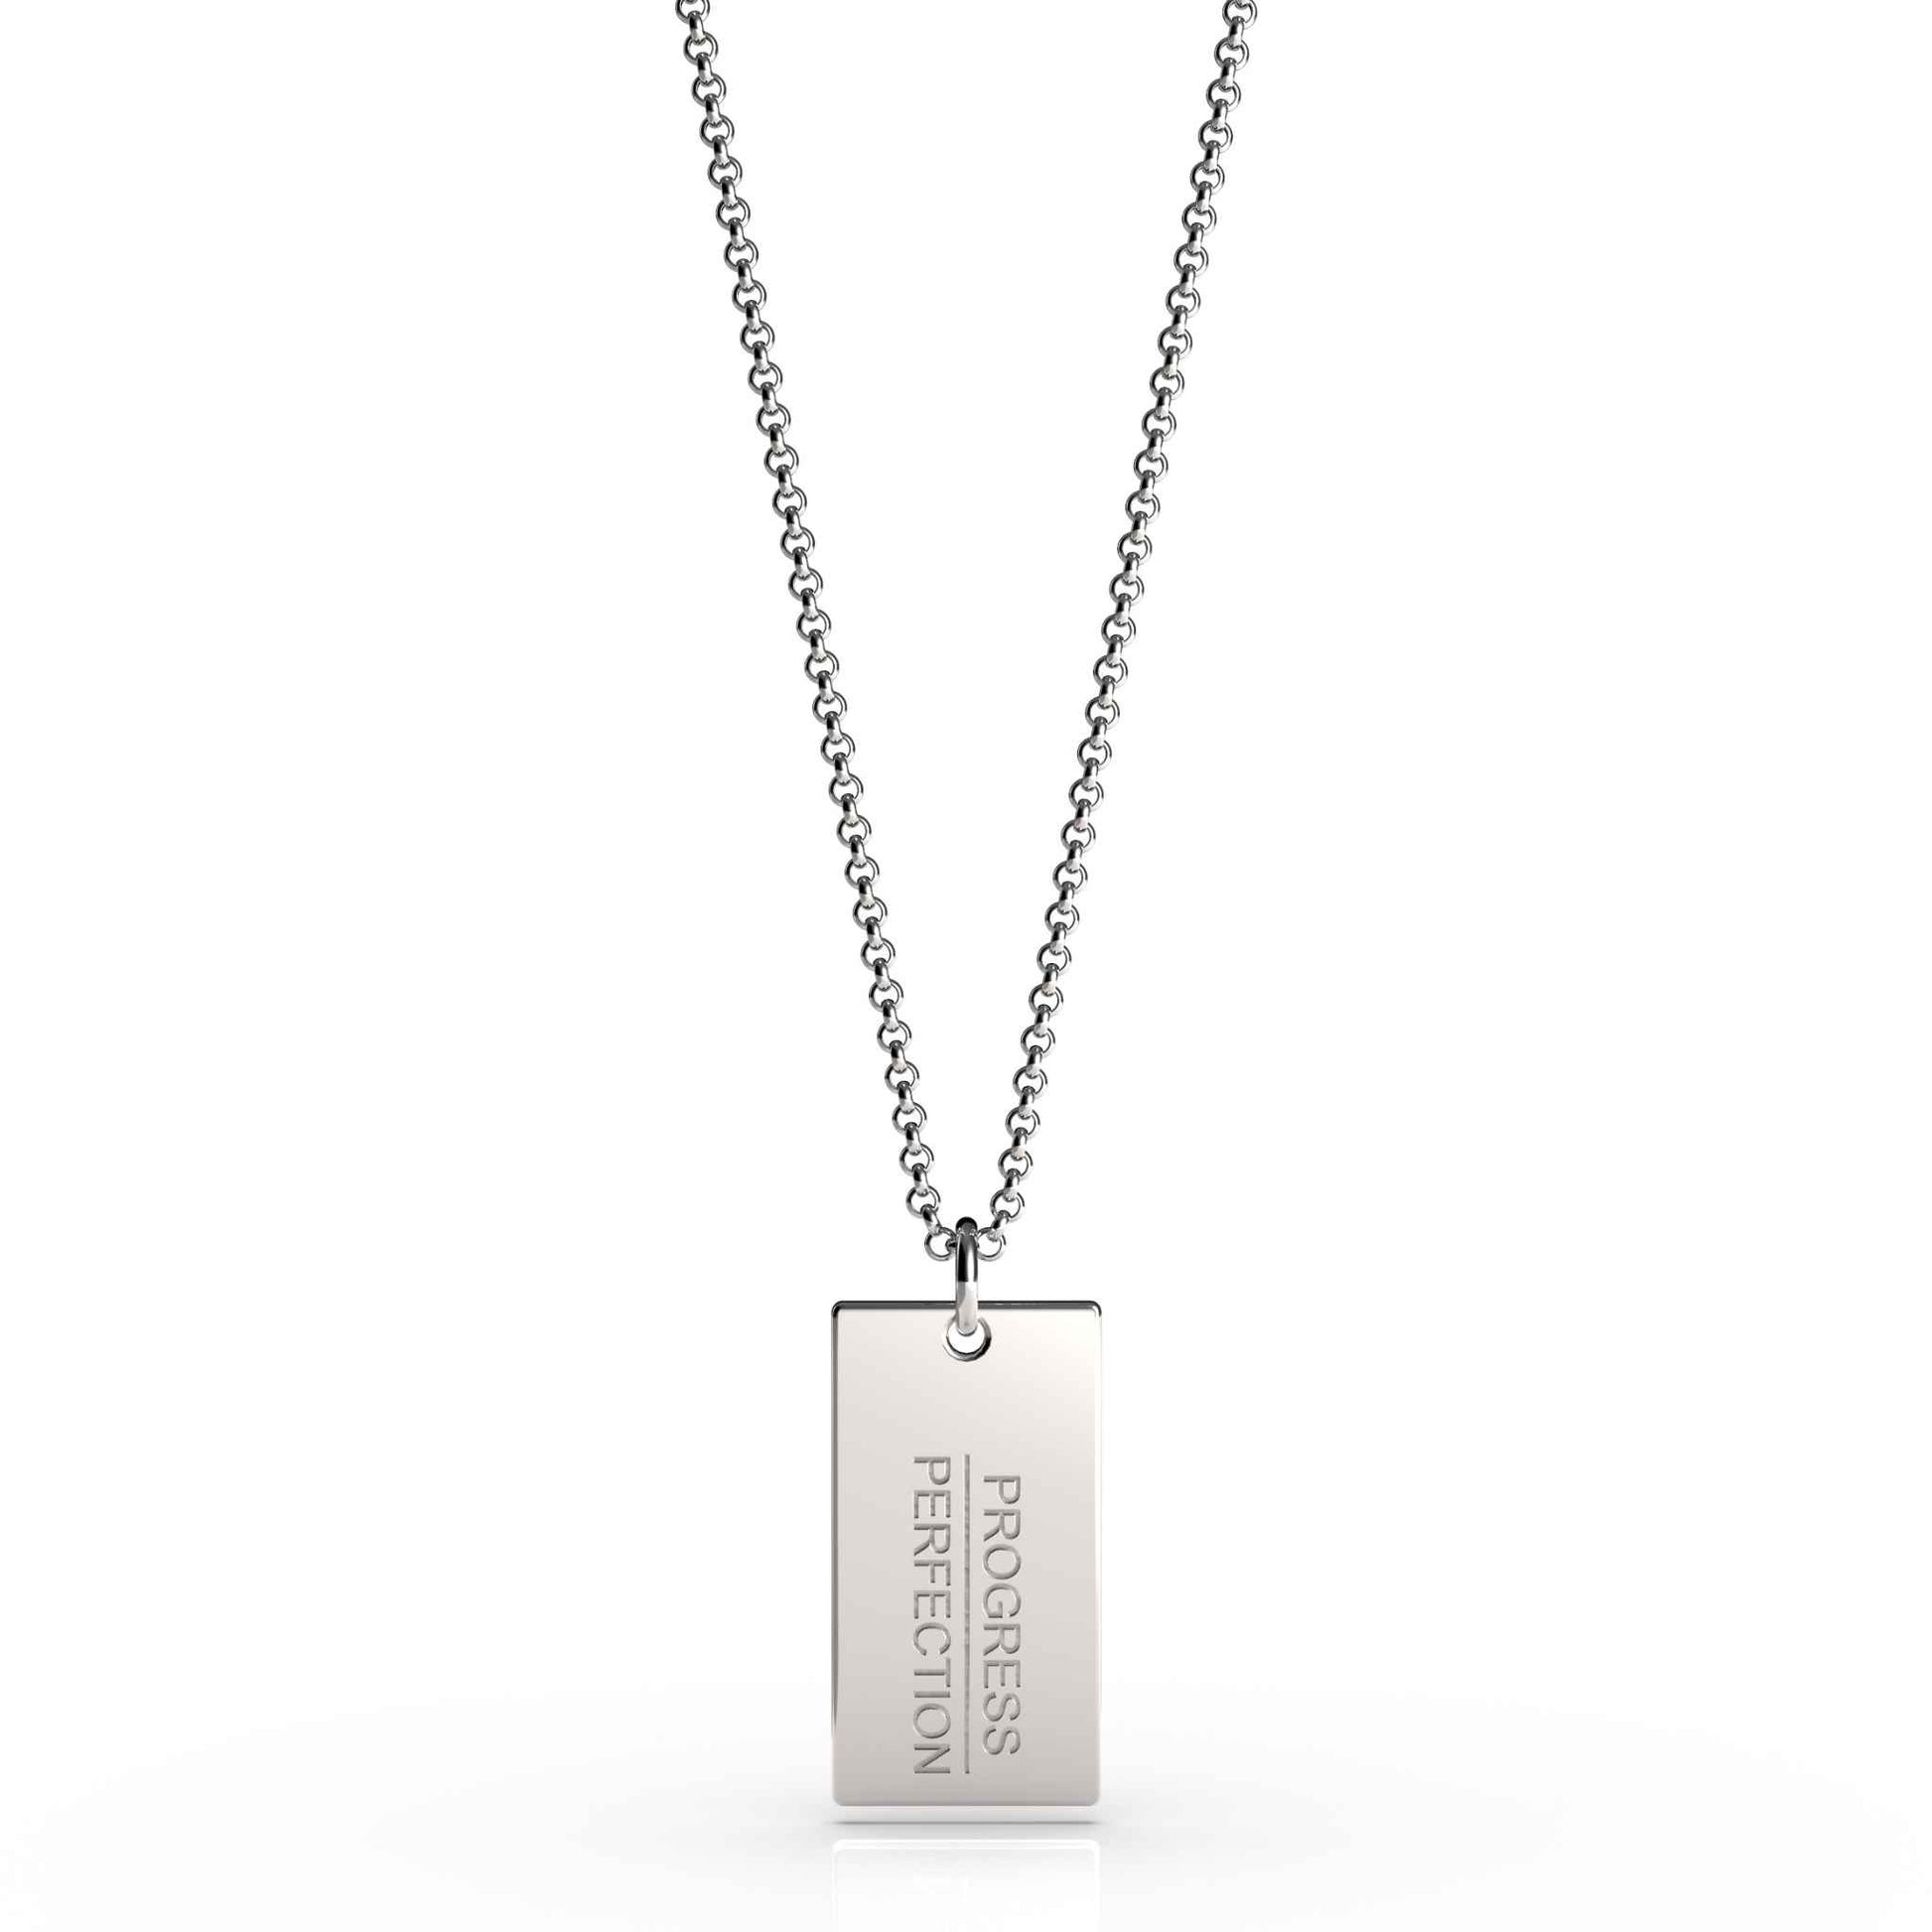 Mindfulness necklace | Progress over perfection | Meaningful jewelry